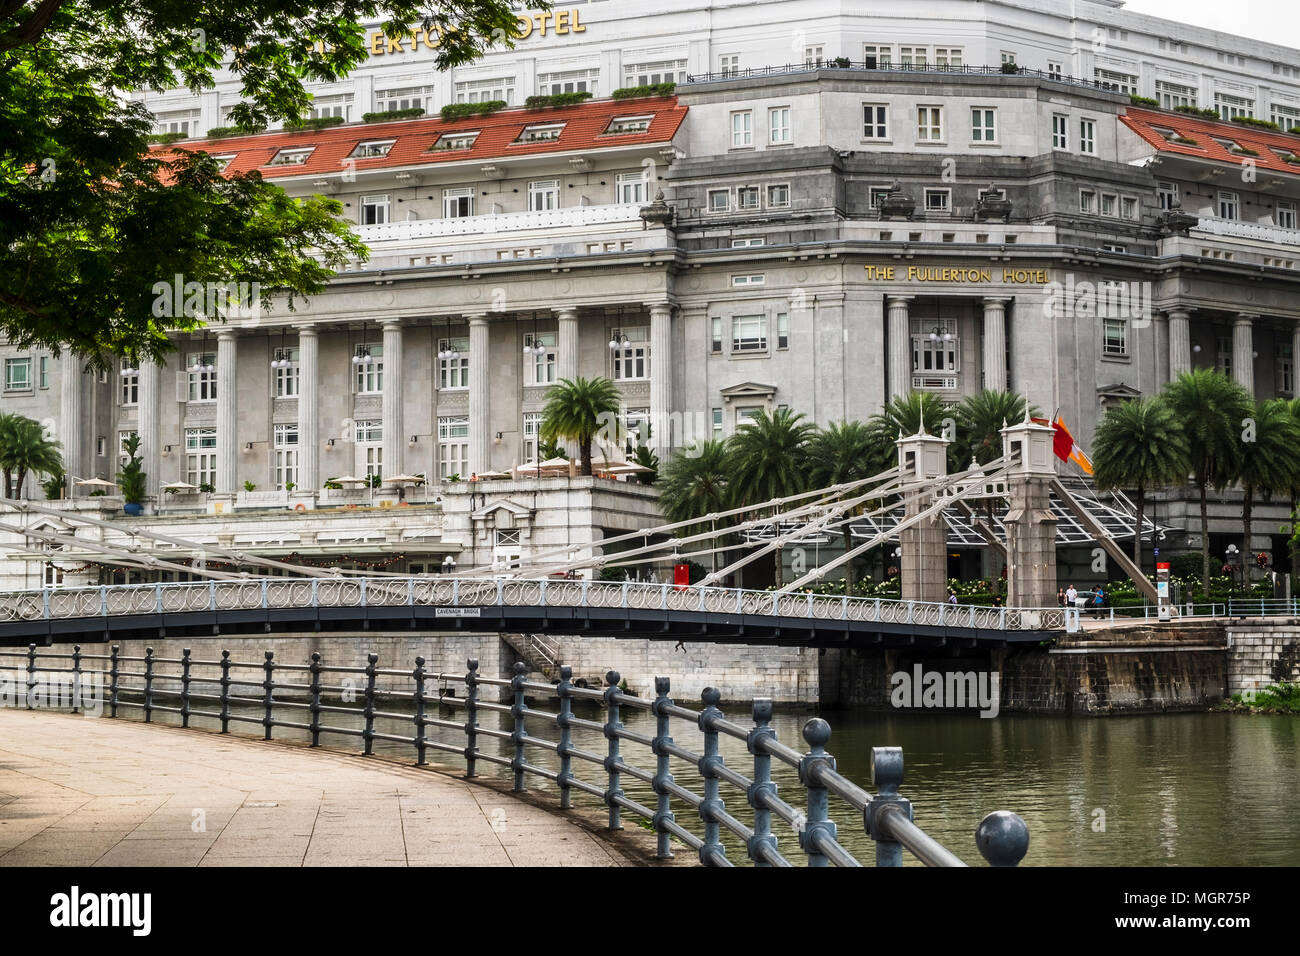 Cavenagh Bridge with The Fullerton Hotel in backgrouond, Singapore Stock Photo